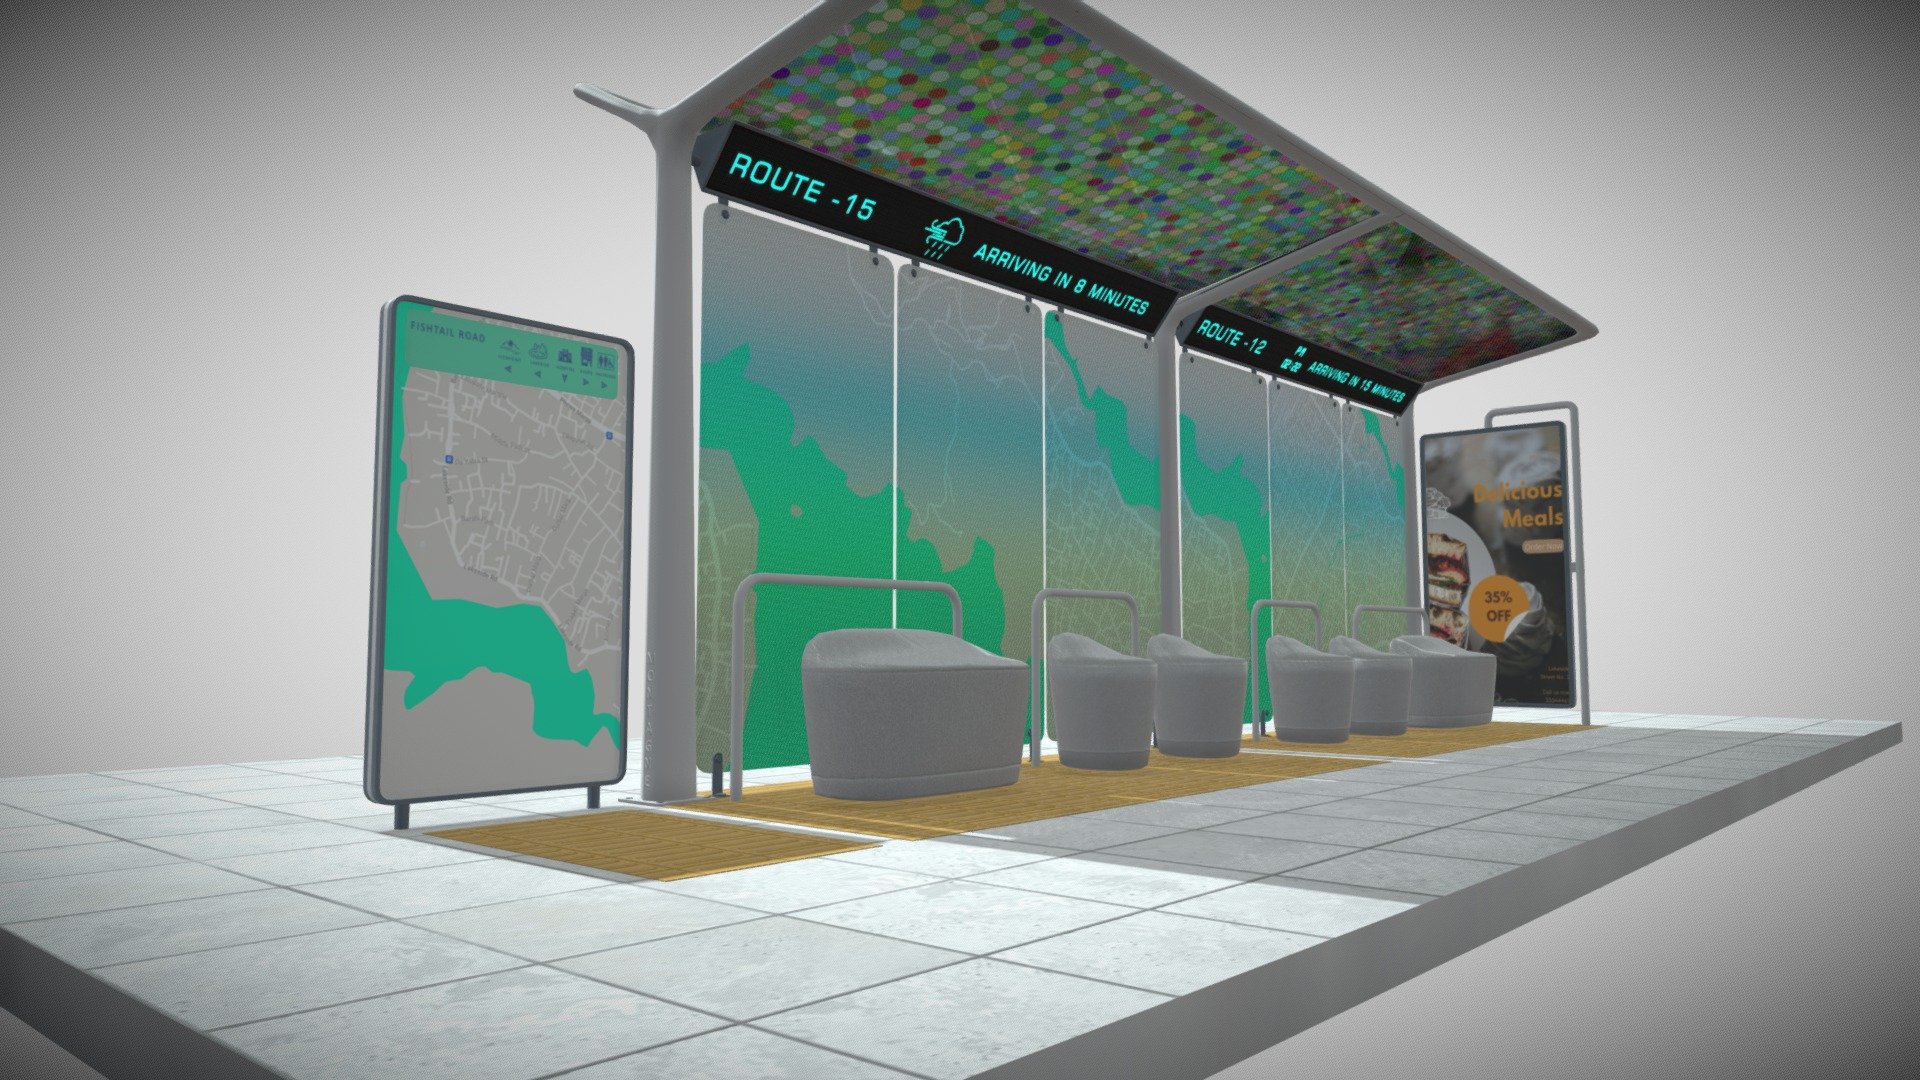 A simple Modern Bus Station that gives route information and location information 3d model